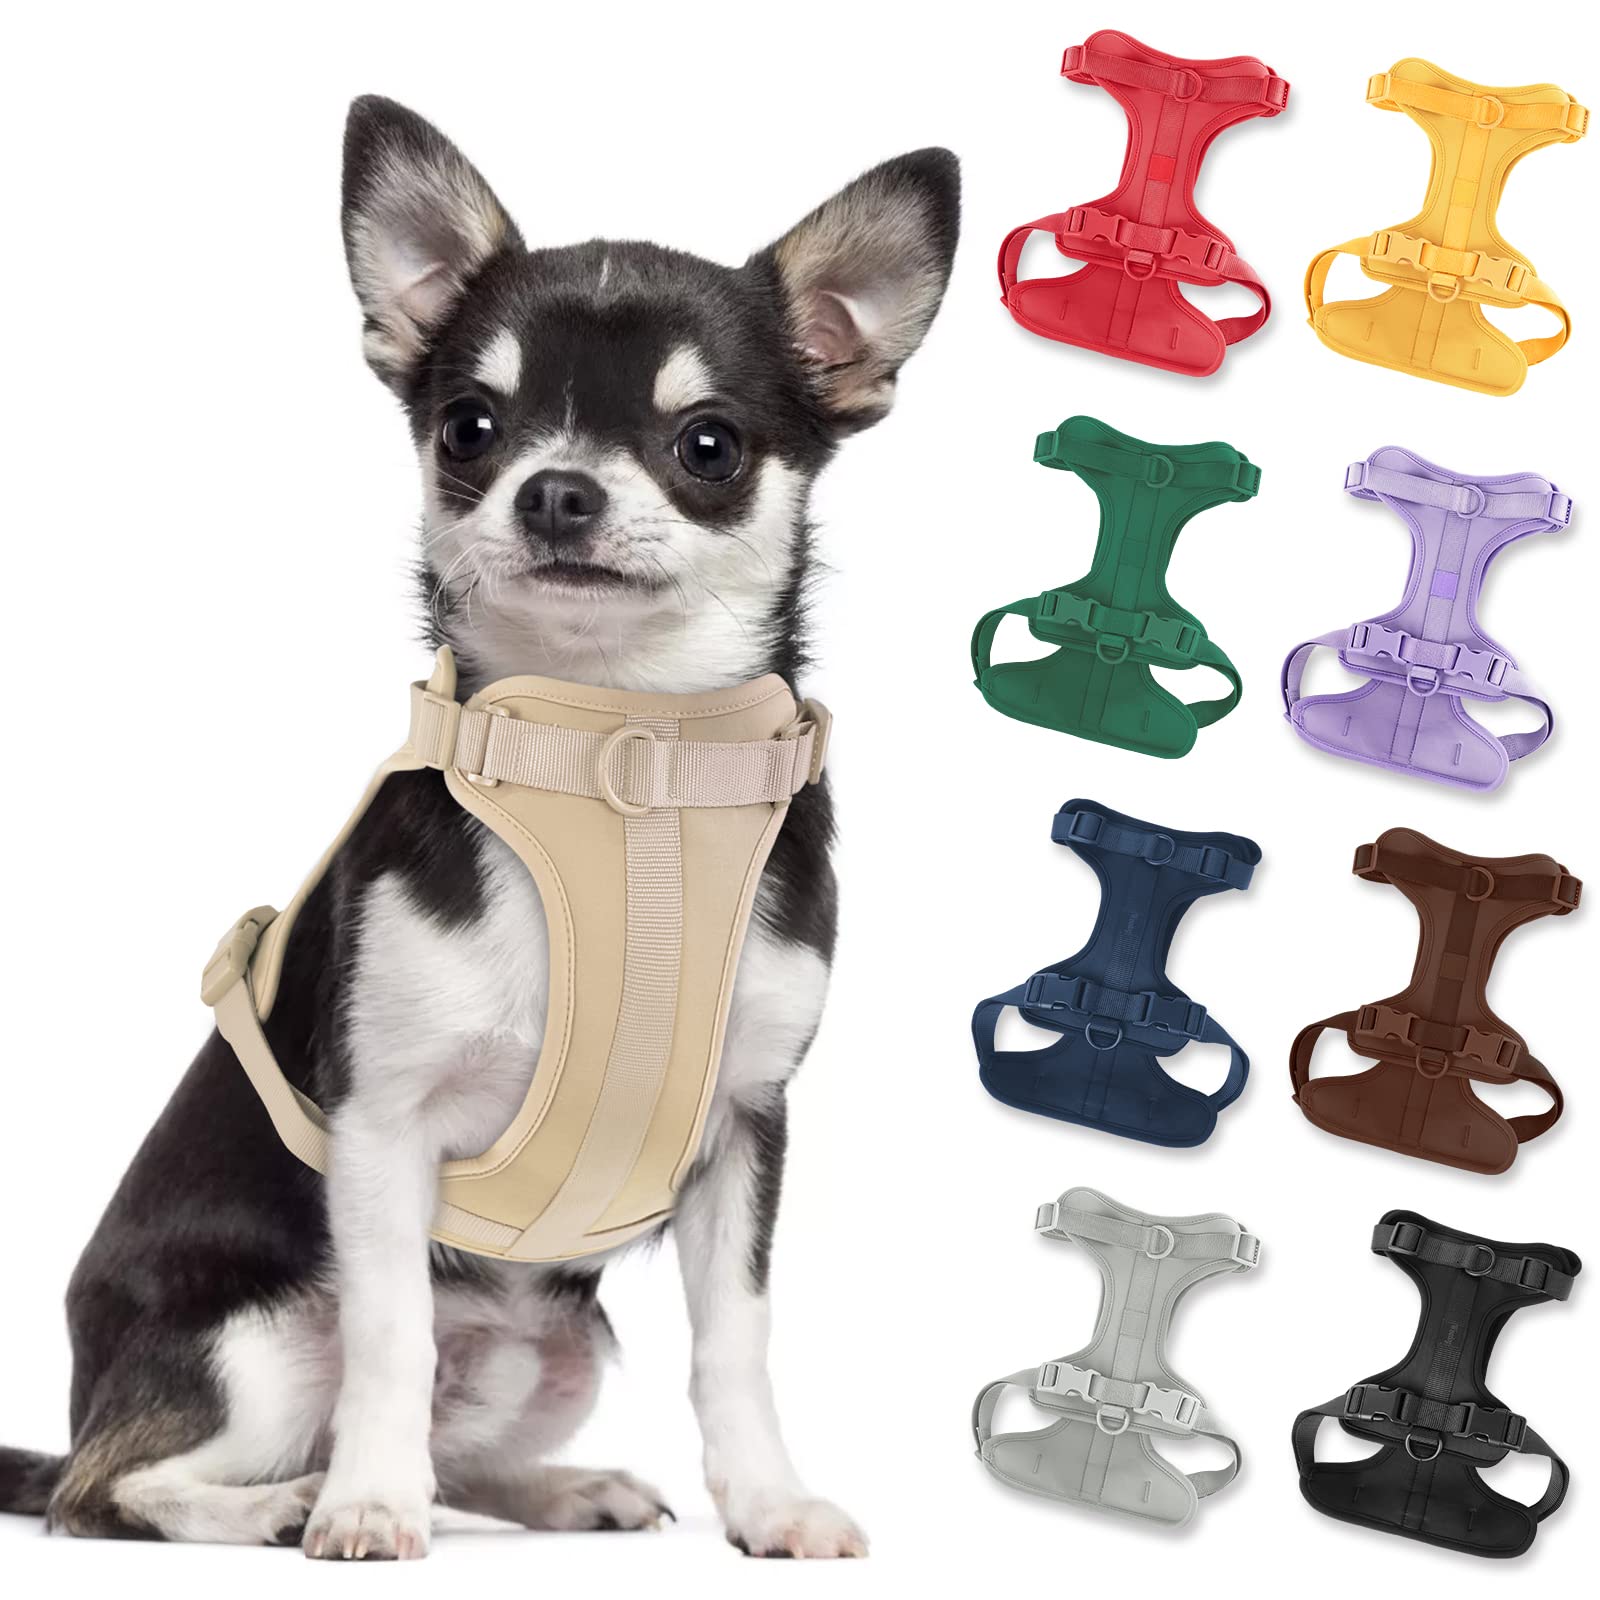 Wisedog No Pull Lightweight Dog Harness: Adjustable Durable Breathable Mesh Pet Vest Harness With Soft And Comfortable Cushion, Easy To